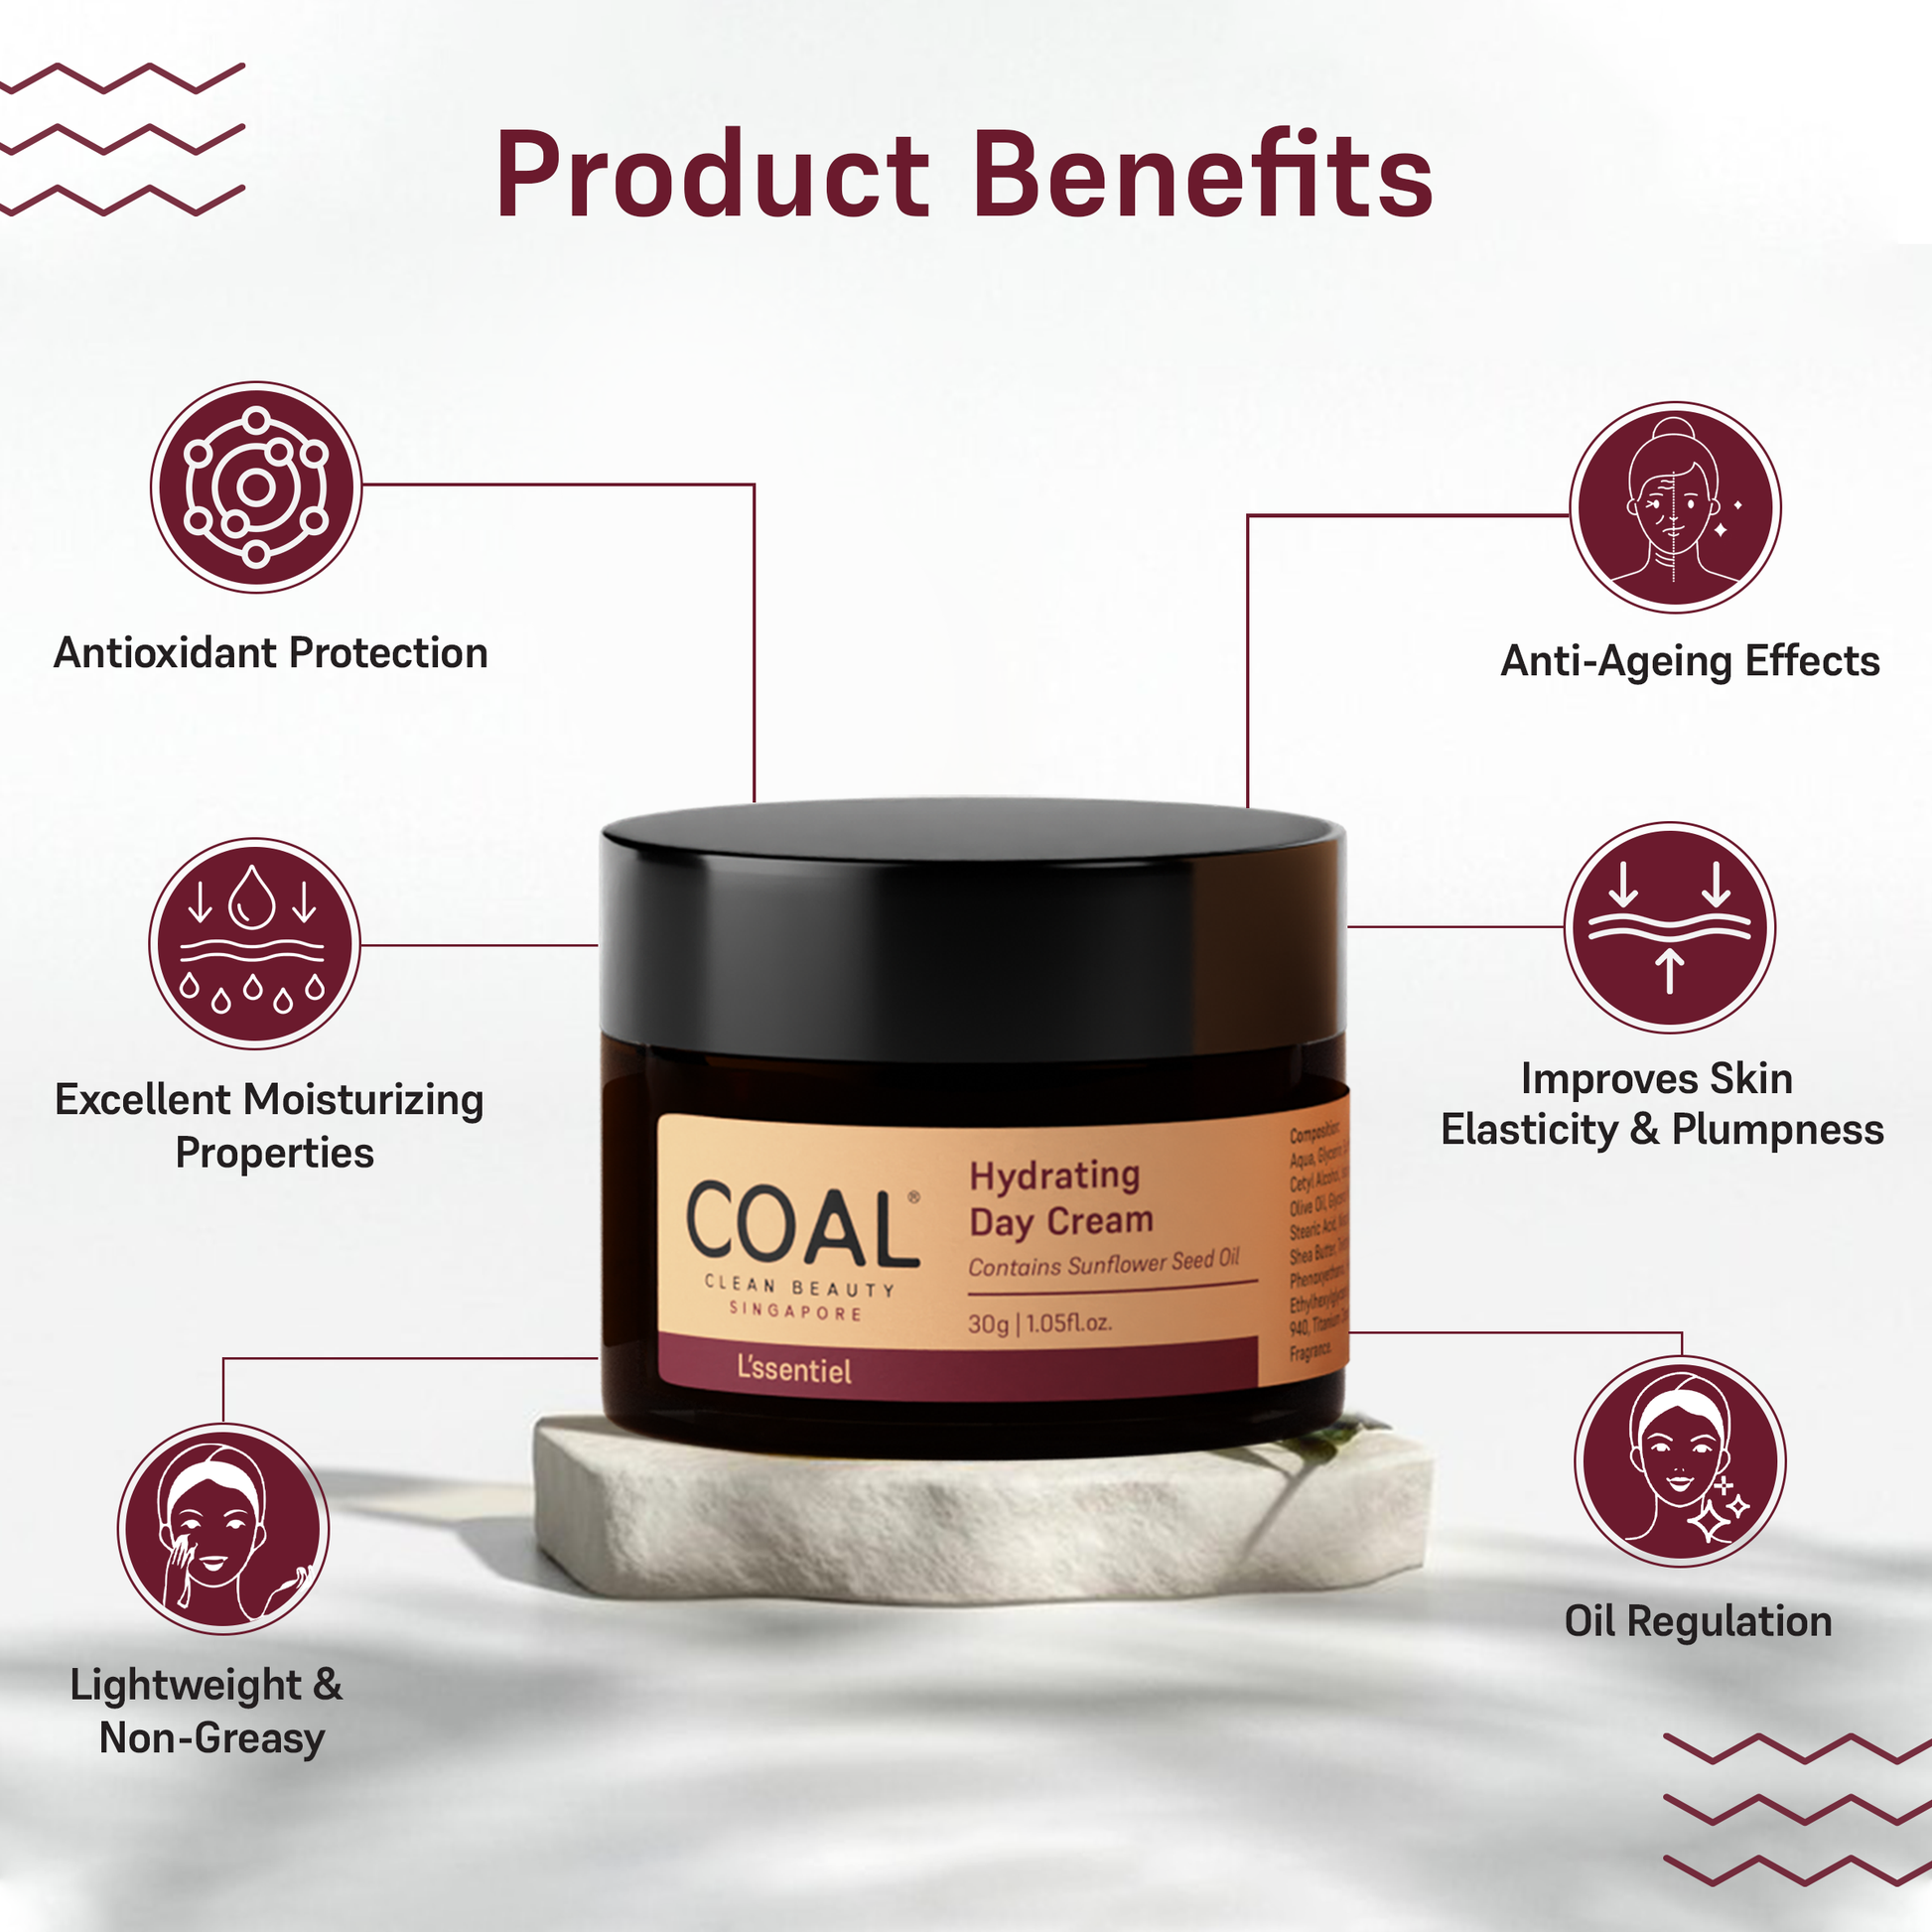 Brightening Gift Combo - For Her Coal Clean Beauty